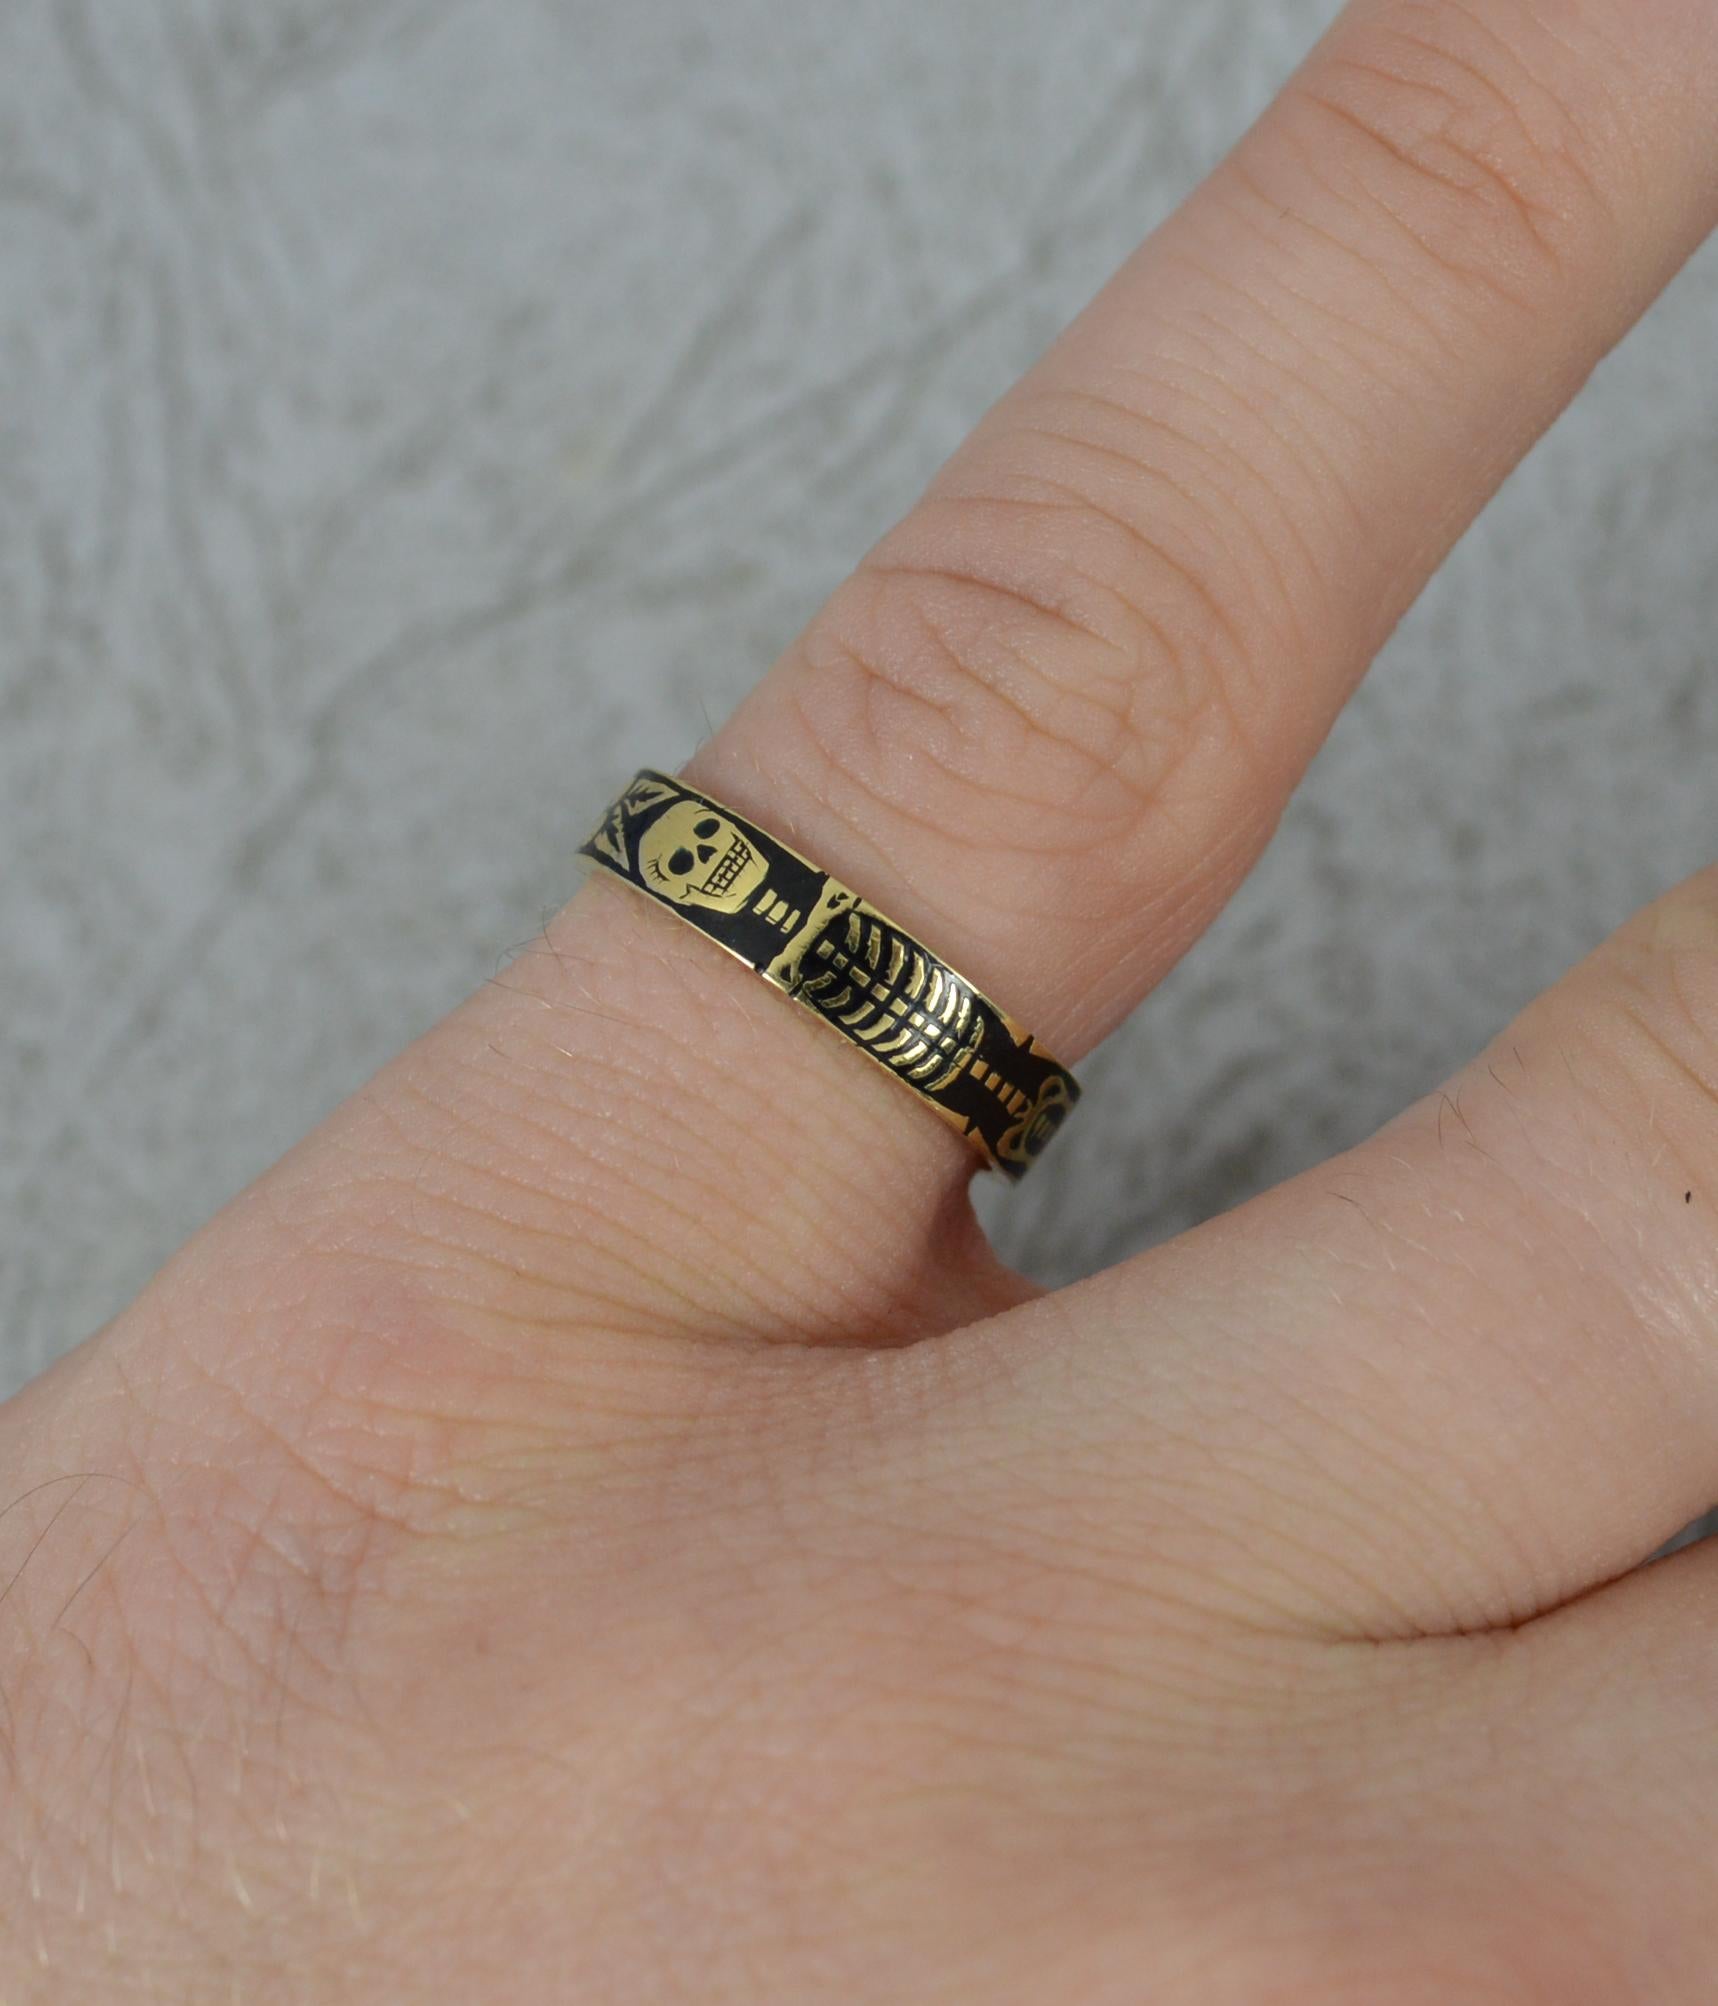 A stunning example of a Georgian style Momento Mori mourning ring.
Solid 18 carat gold and black coloured enamel example.
Incredibly well made. Hand made enamelling in a kiln as the original momento mori bands were.
The piece depicts a large full